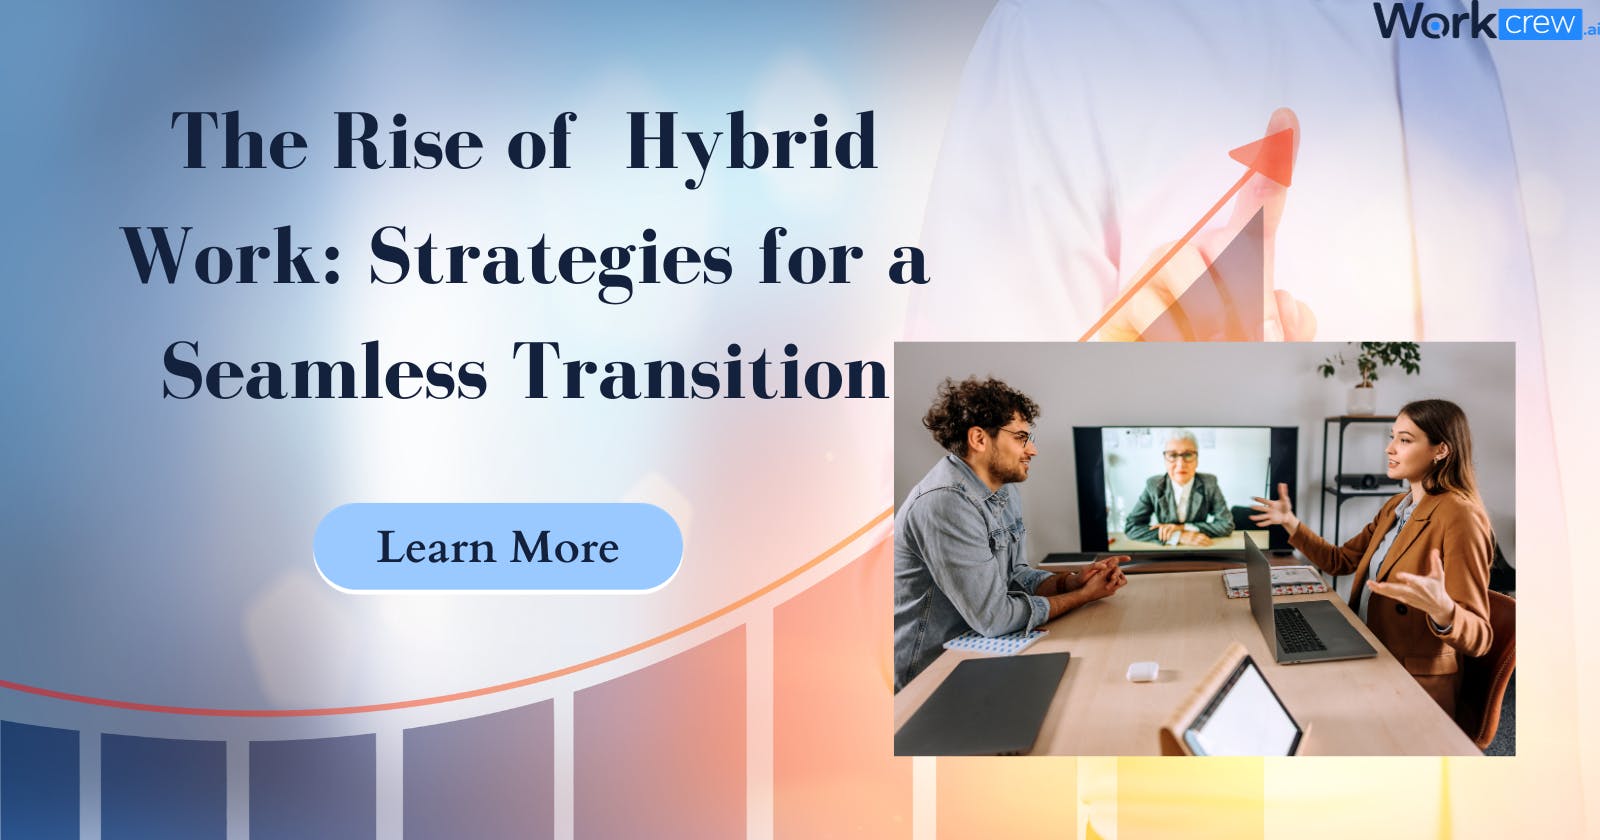 The Rise of Hybrid Work: Strategies for a Seamless Transition